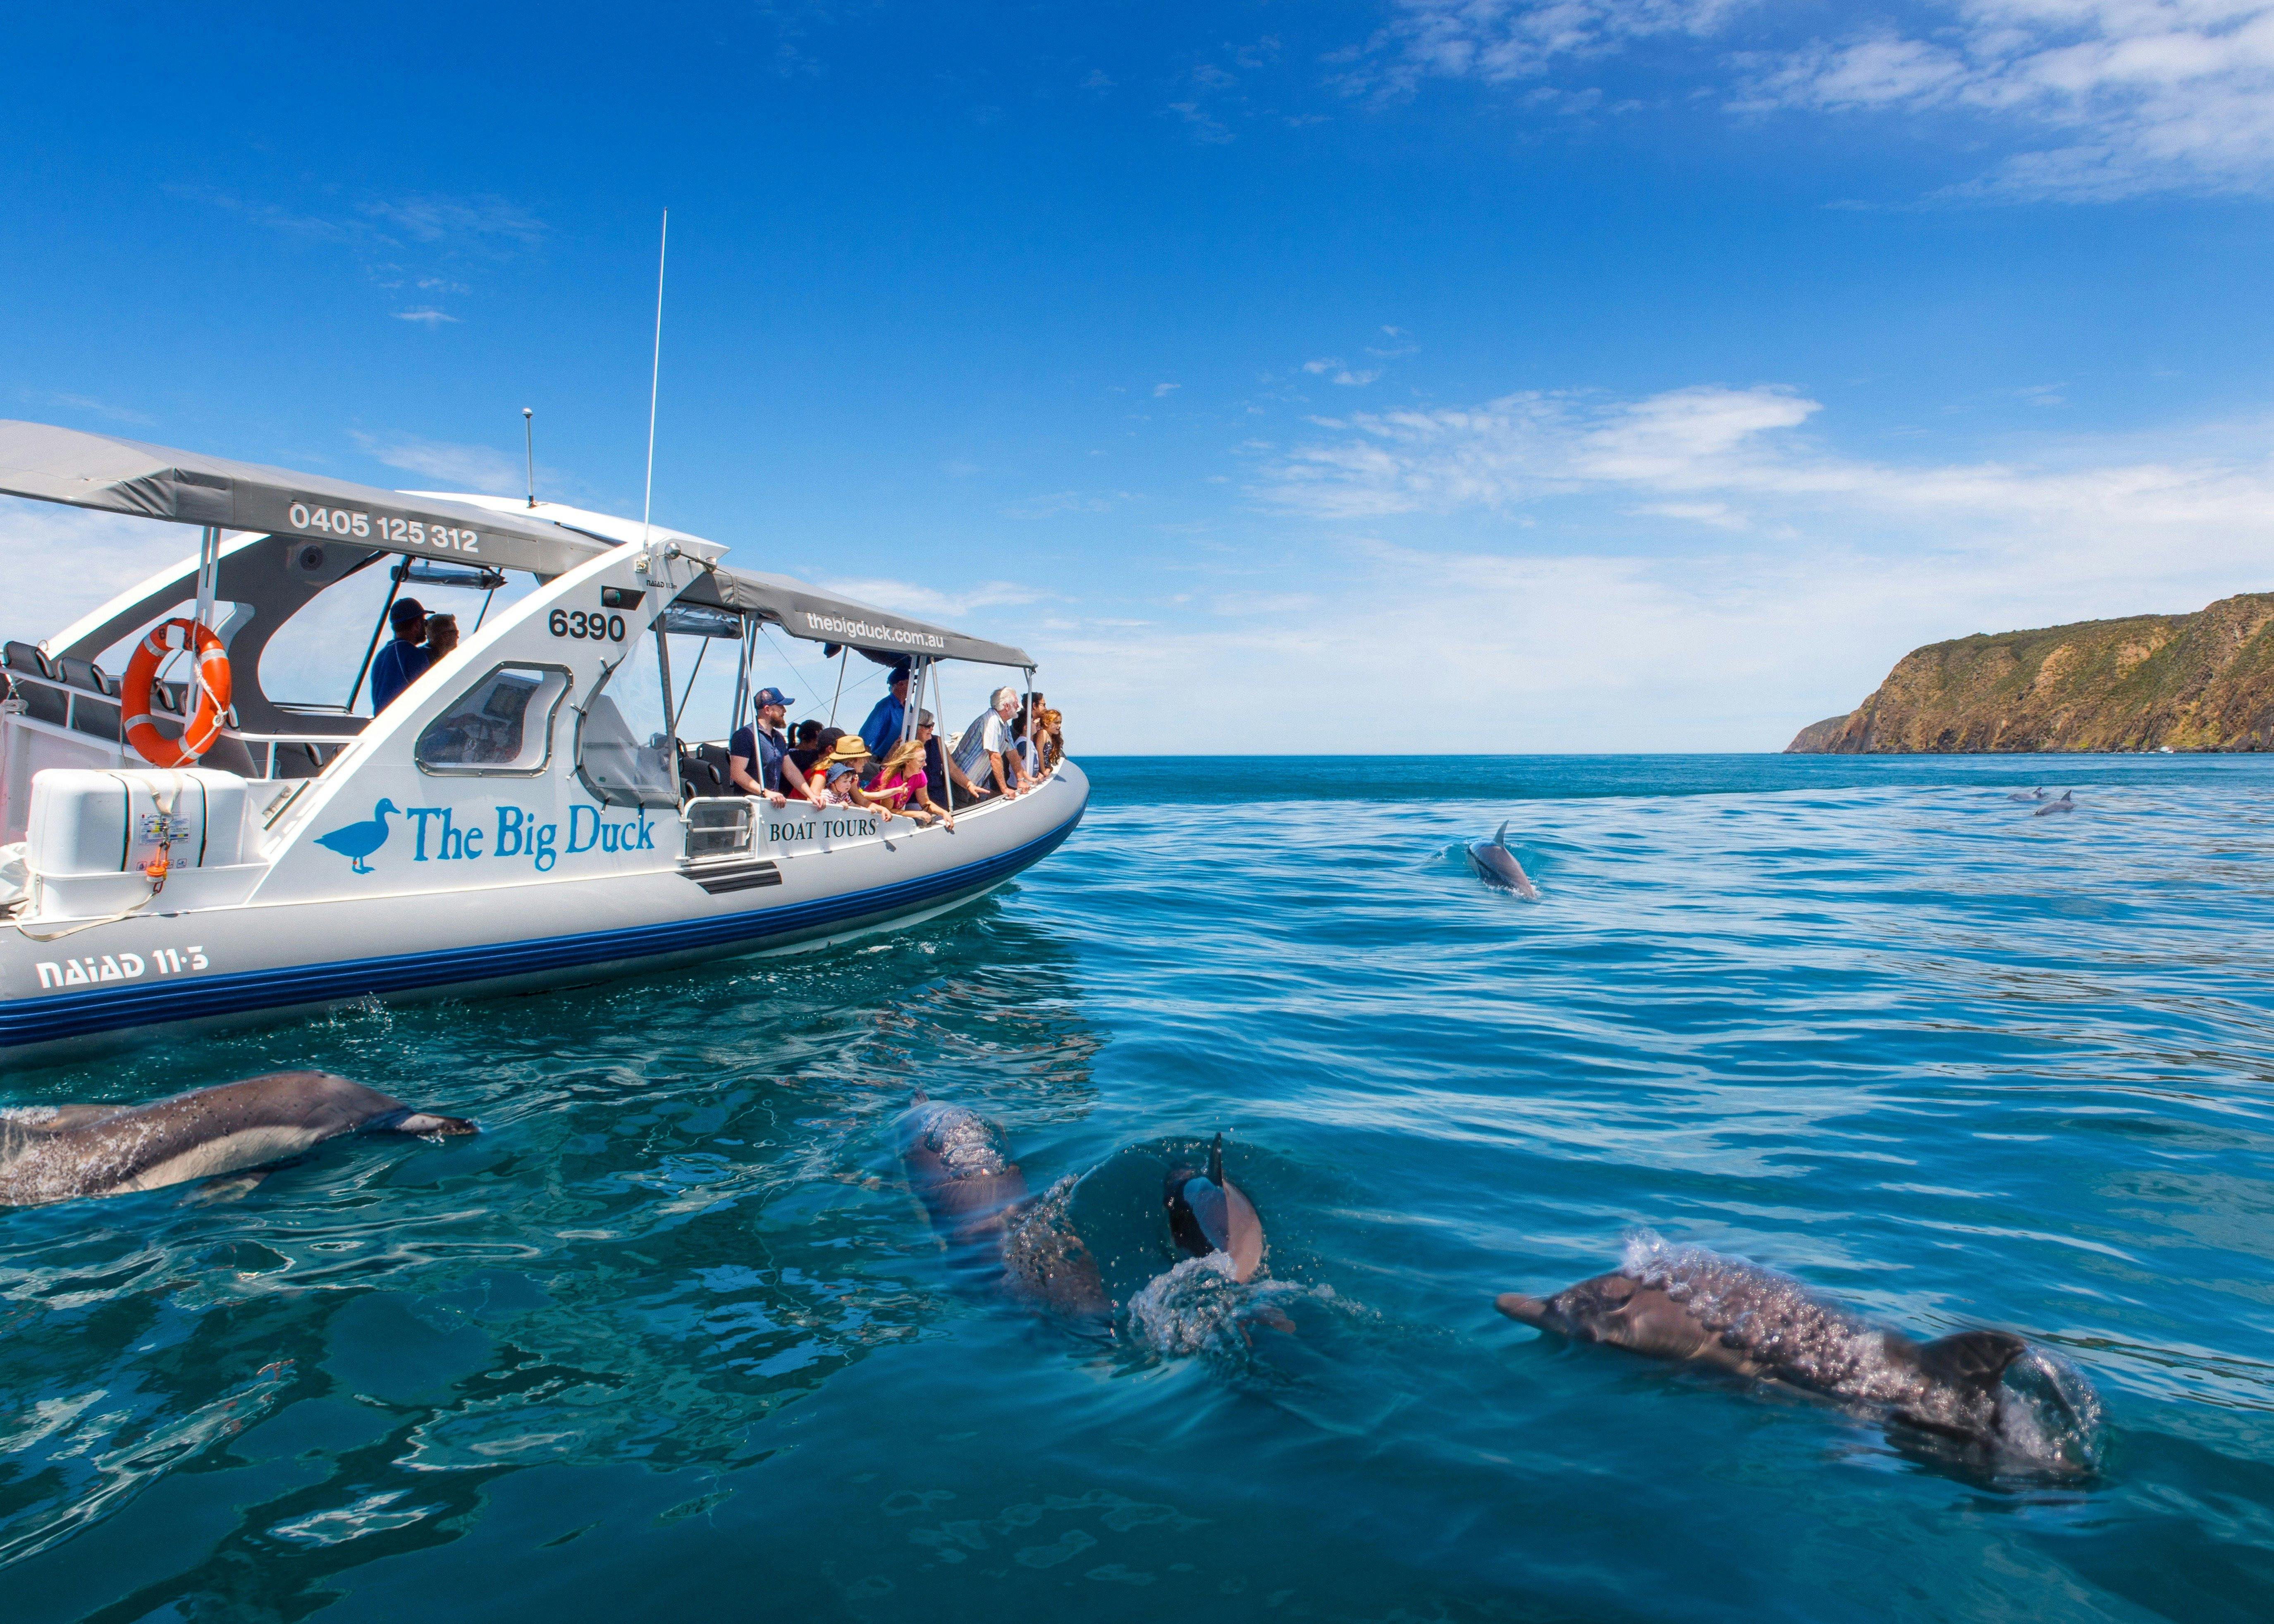 dolphins victor harbor encounter bay the big duck boat tour whales waitpinga cliffs seals sea lions